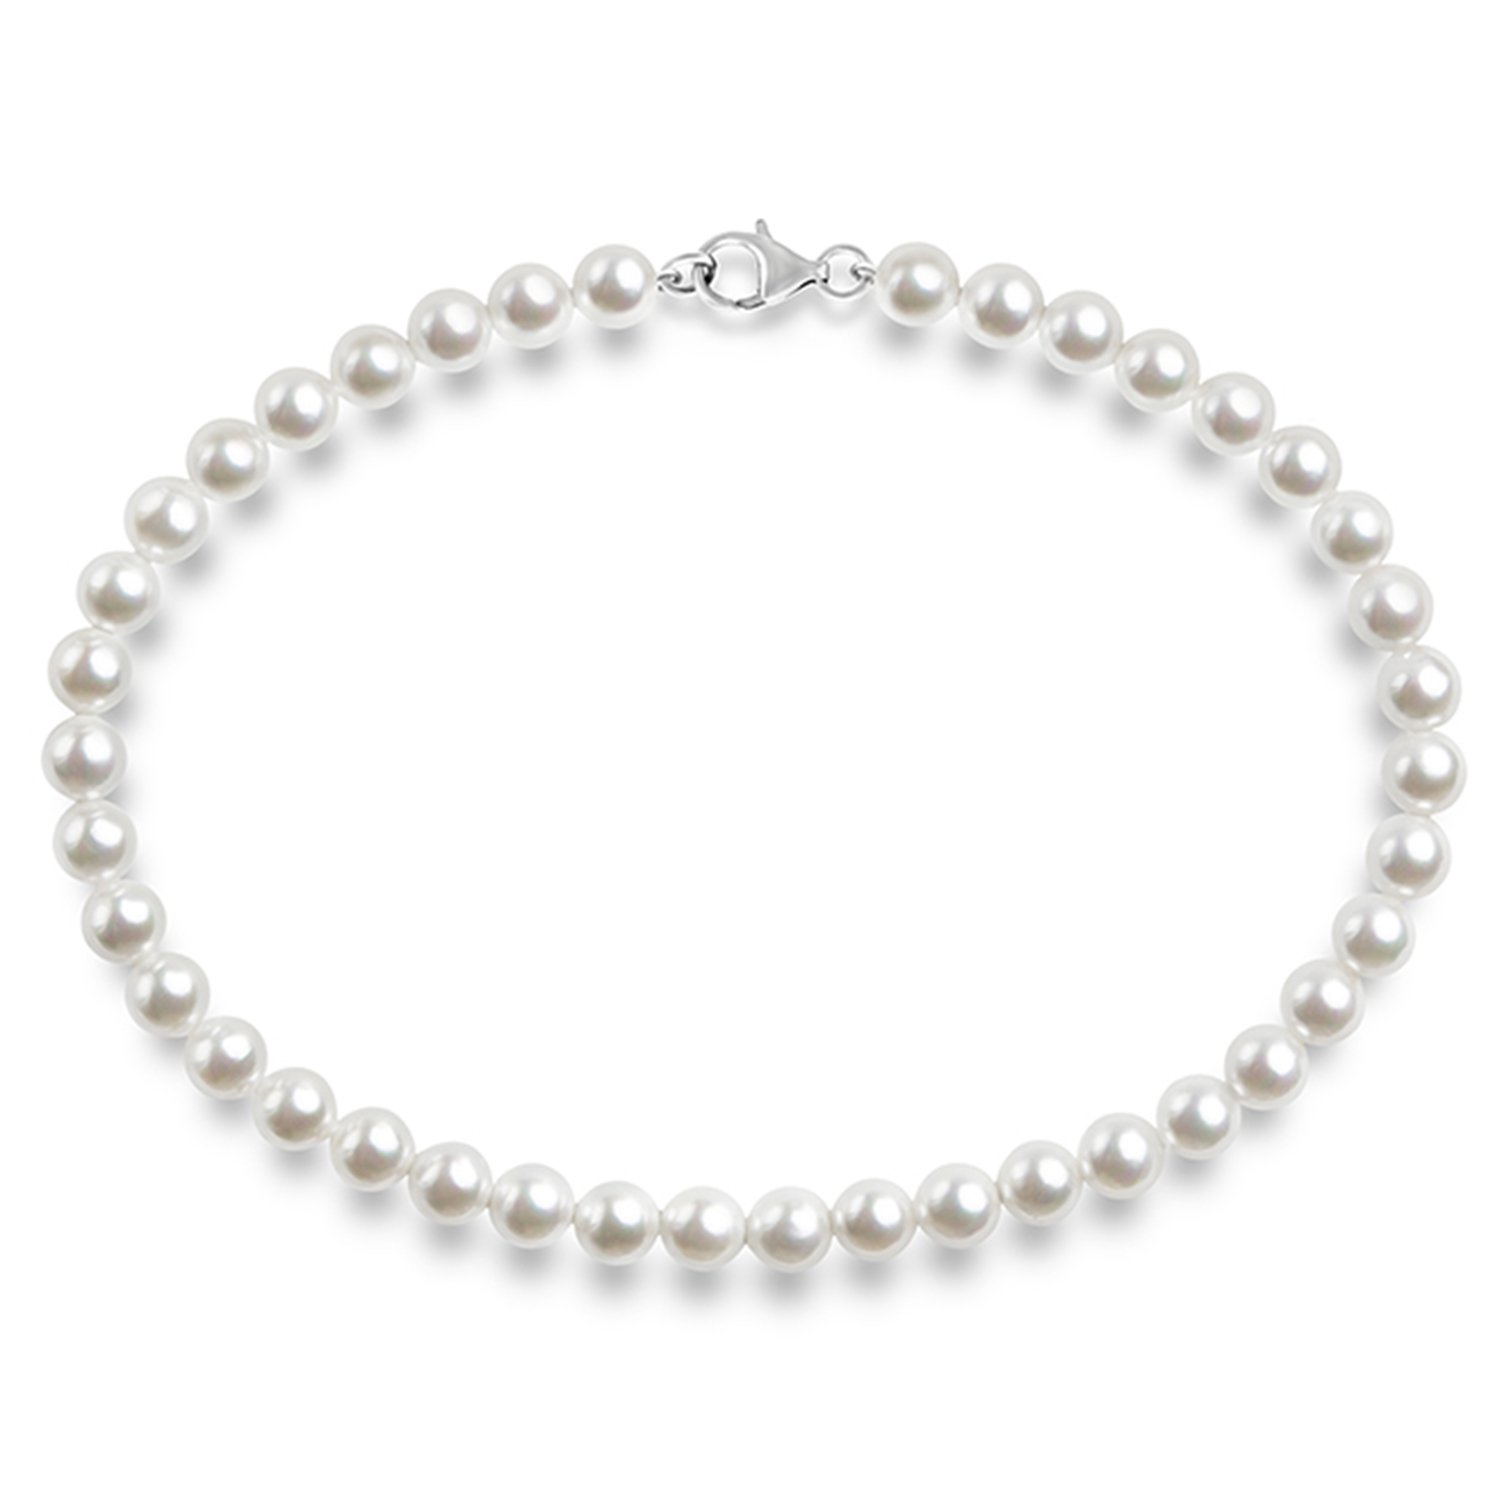 Pearl Choker Round White Simulated Shell Pearl Necklace Strand with ...